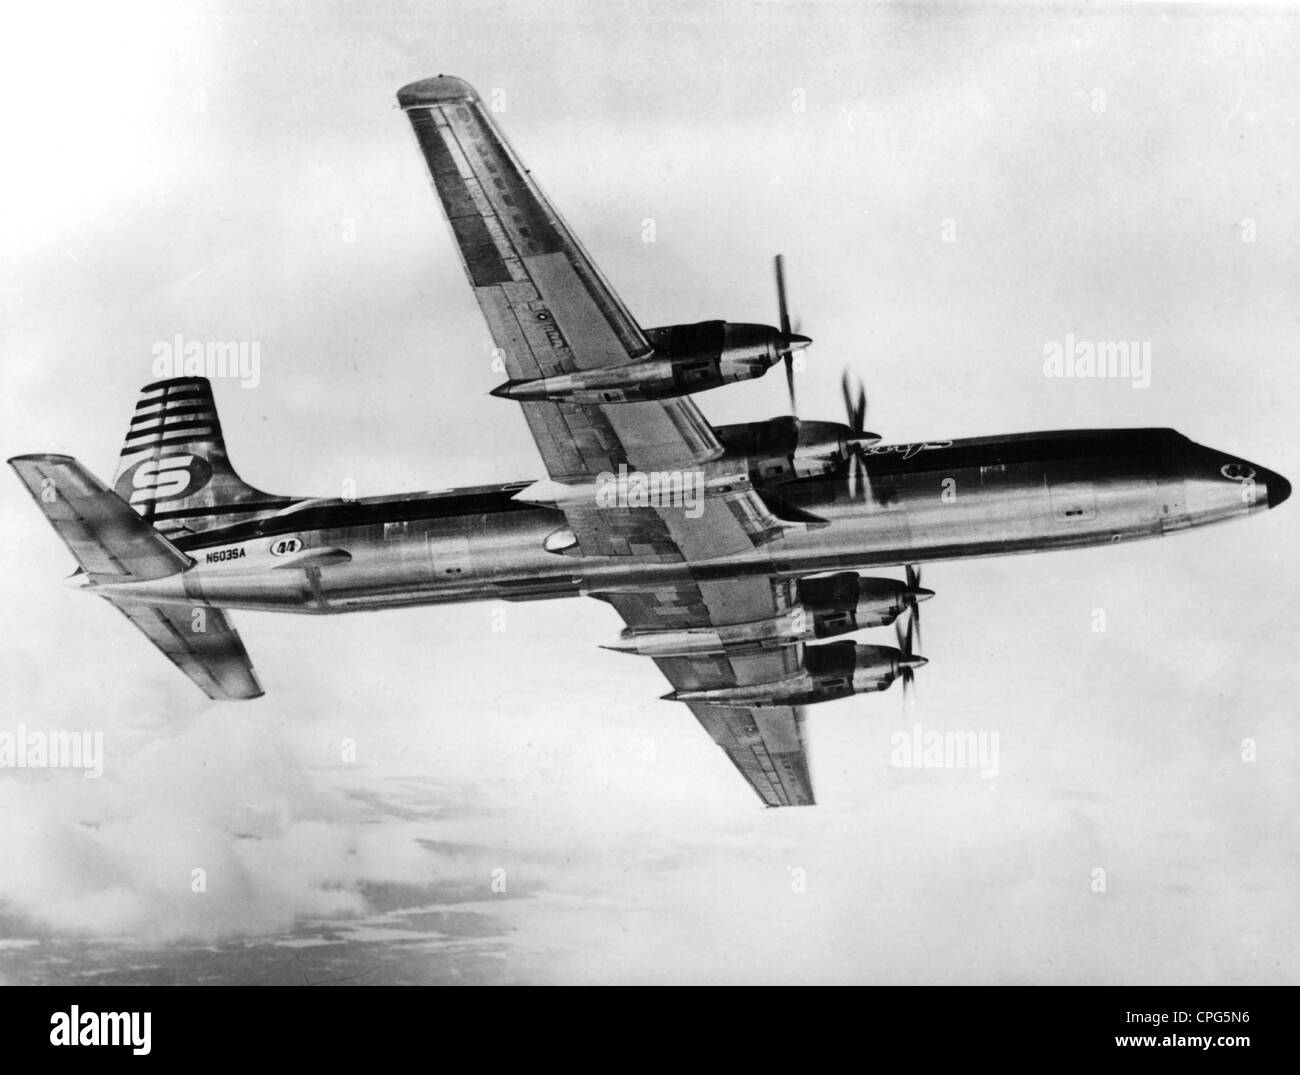 transport / transportation, aviation, transport aircraft, Canadair 44, 1962, 1960s, 60s, 20th century, historic, historical, transport aircraft, transport plane, transport, transport aircraft, transport planes, transports, airplane, aeroplane, plane, airplanes, aeroplanes, planes, propeller plane, propeller-driven aircraft, air freighter, flight, flights, flying, Additional-Rights-Clearences-Not Available Stock Photo